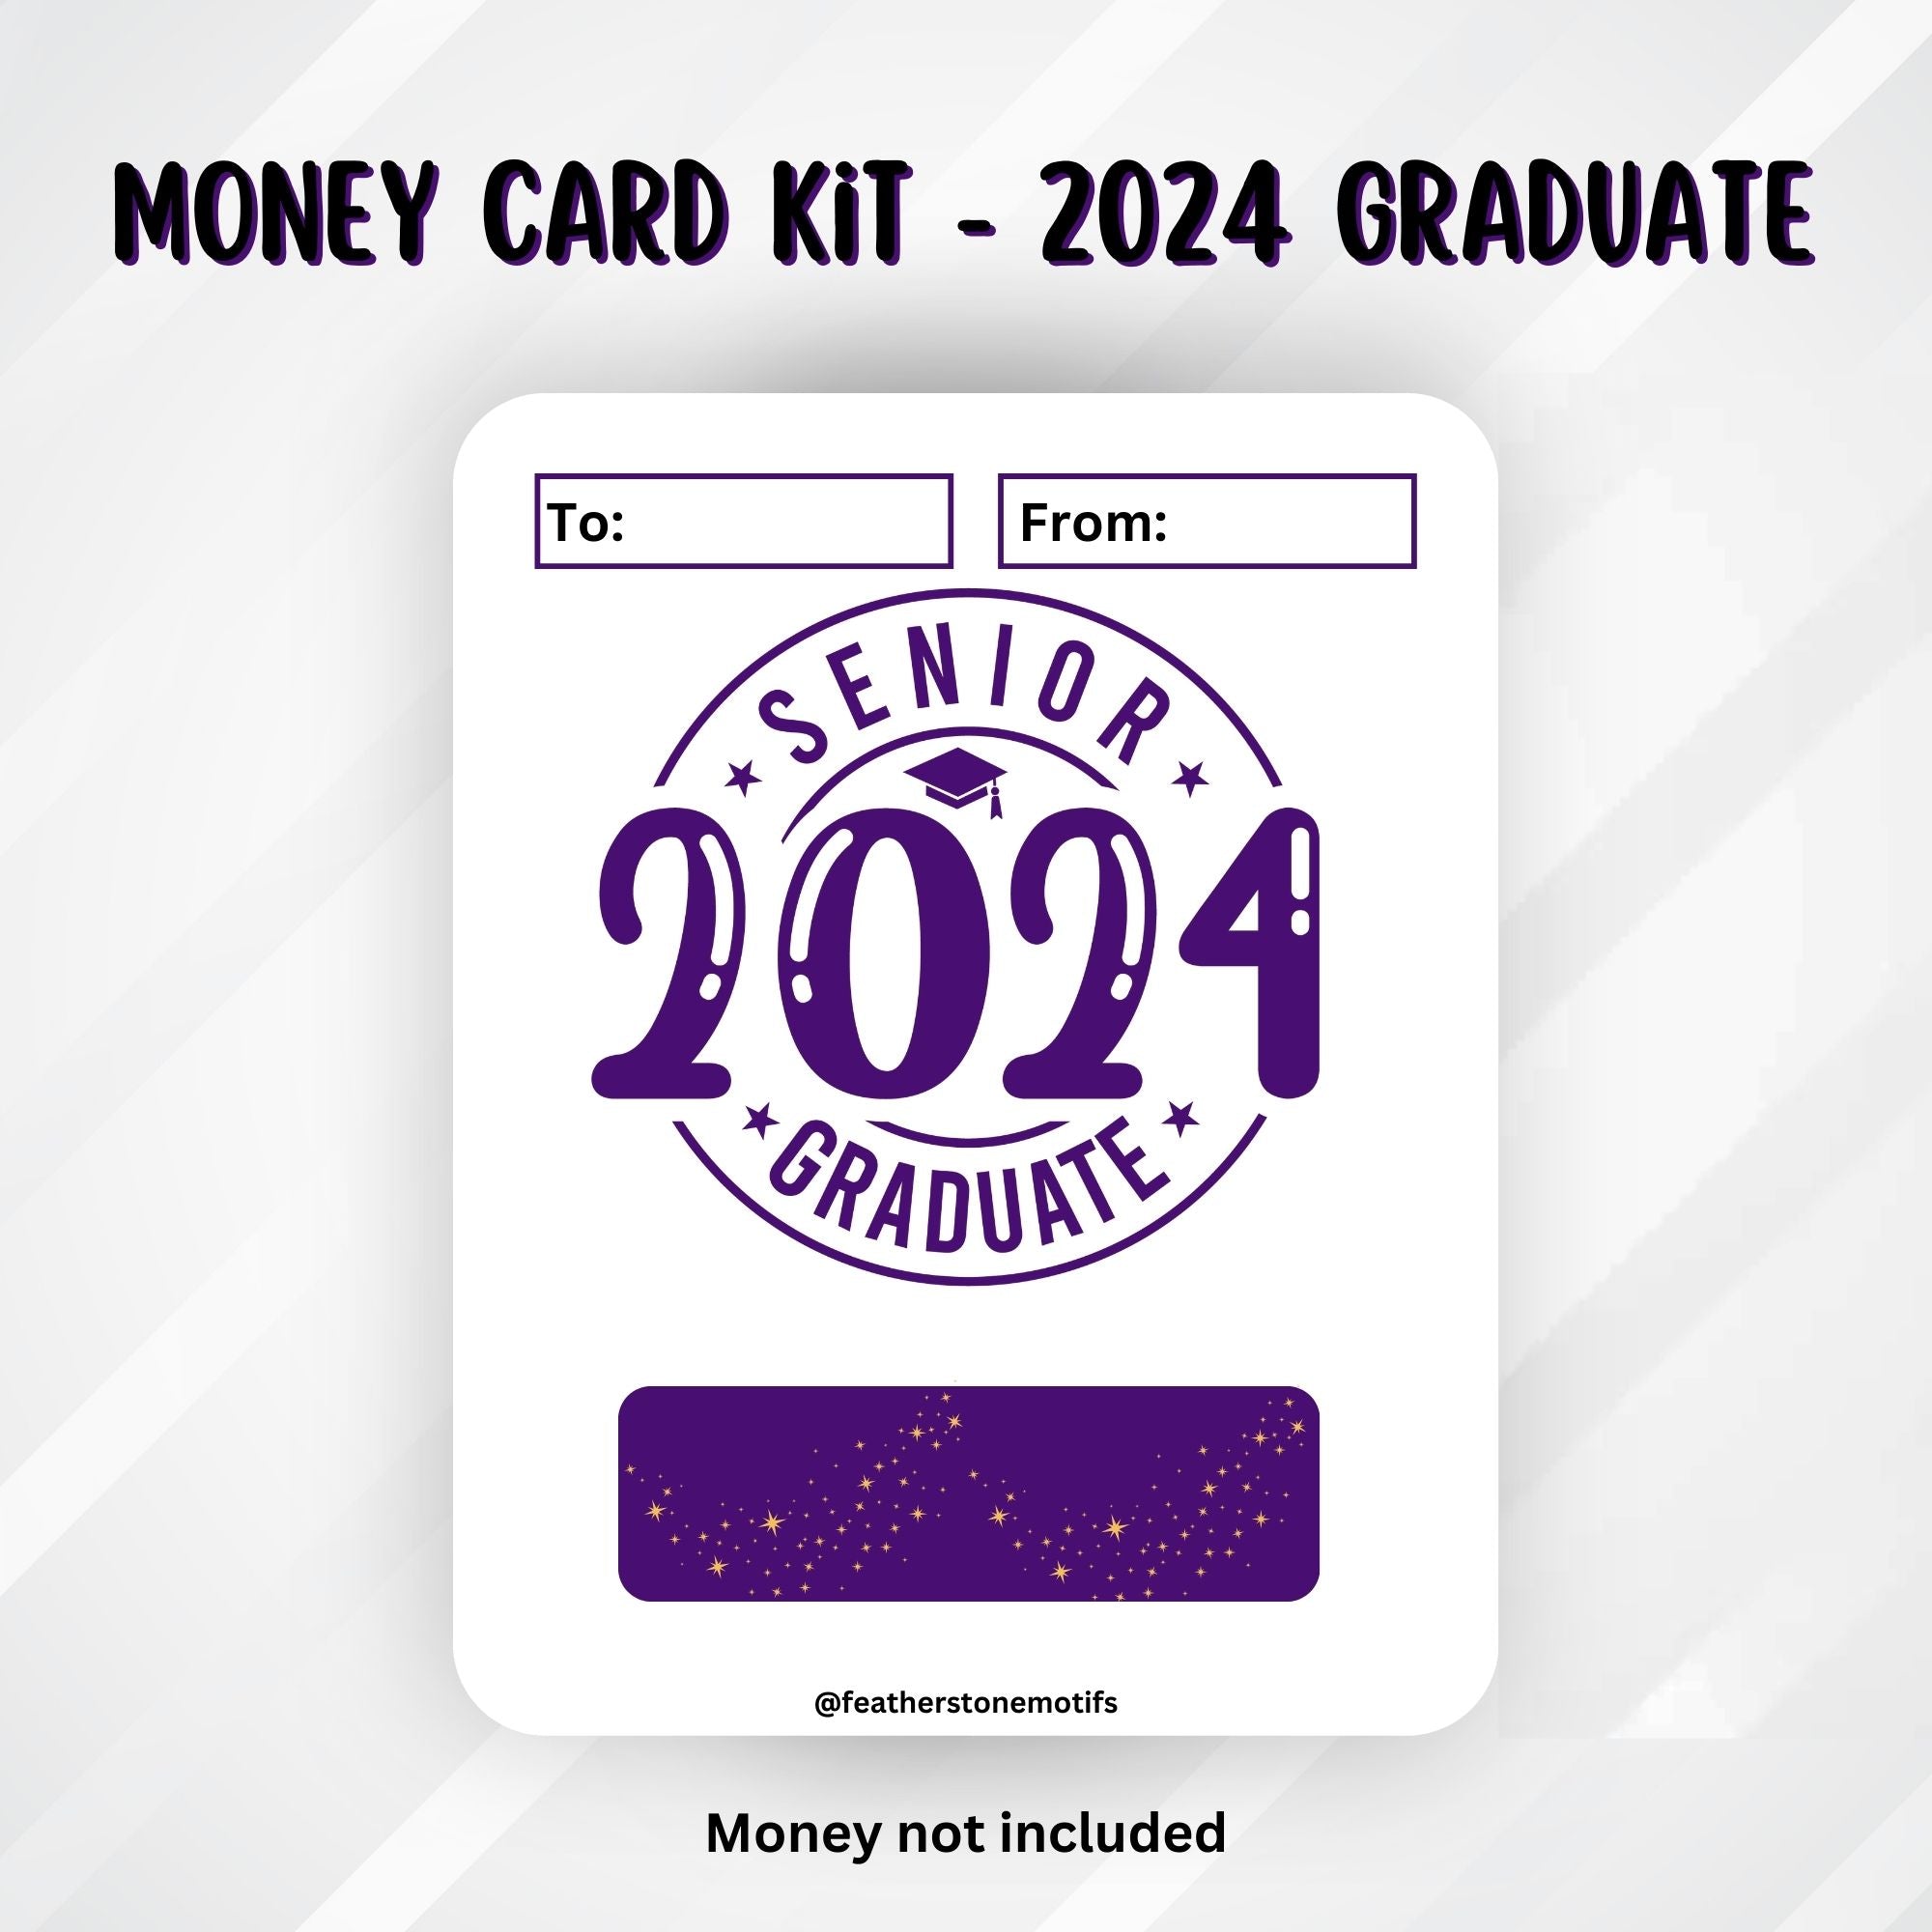 This image shows the 2024 Graduate Money Card without the money tube.